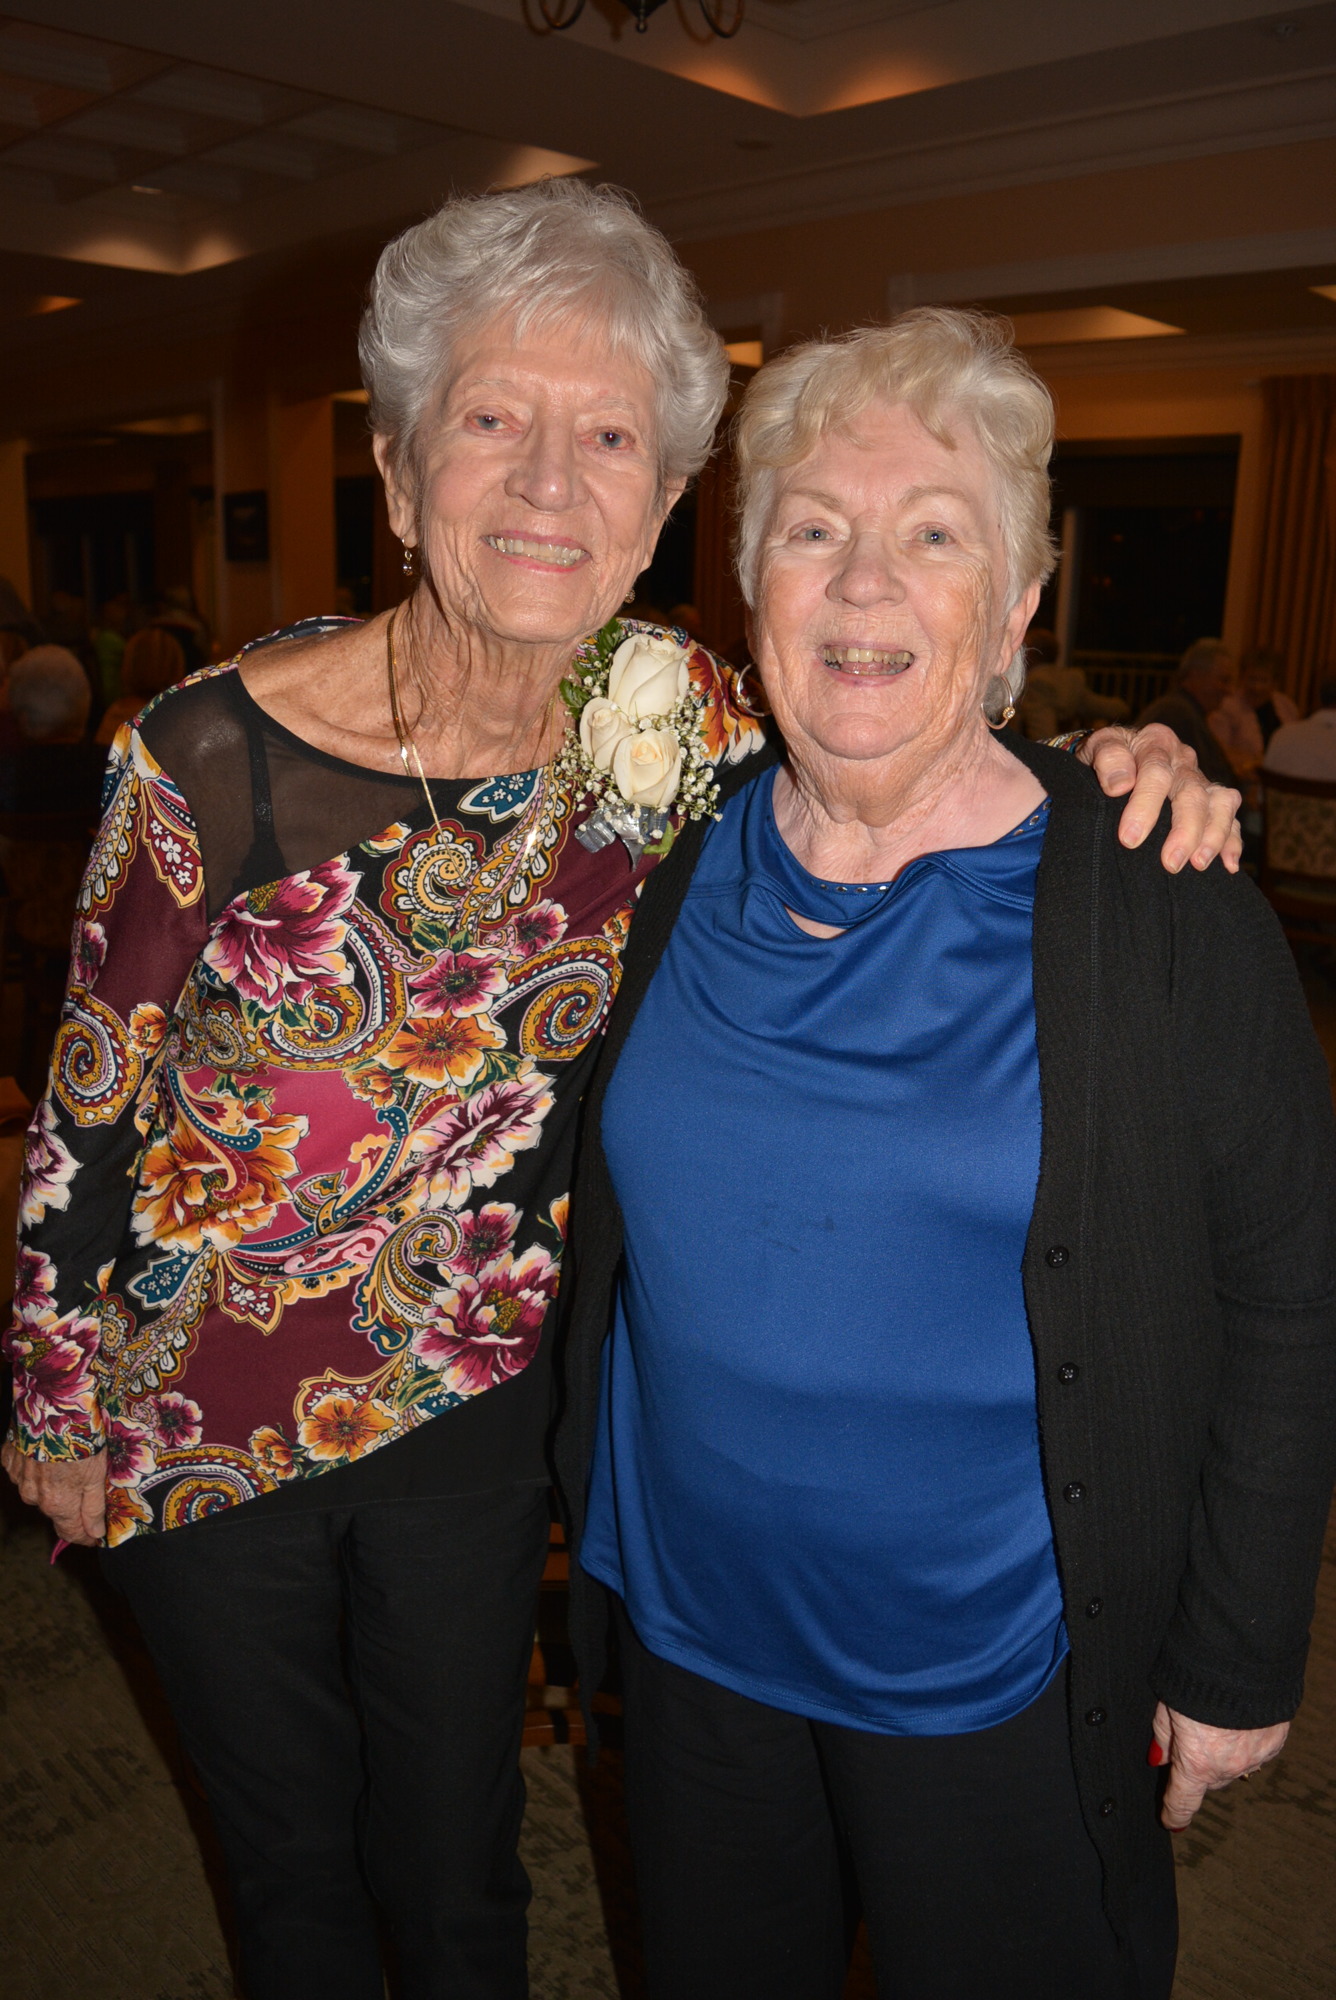 Tara Golf and Country Club's most veteran resident Helen Kunzman wears a corsage during the March 2 dinner celebration. She stands beside friend Jeanne Smith. Kunzman moved to Tara in 1989. Smith came 14 years ago.